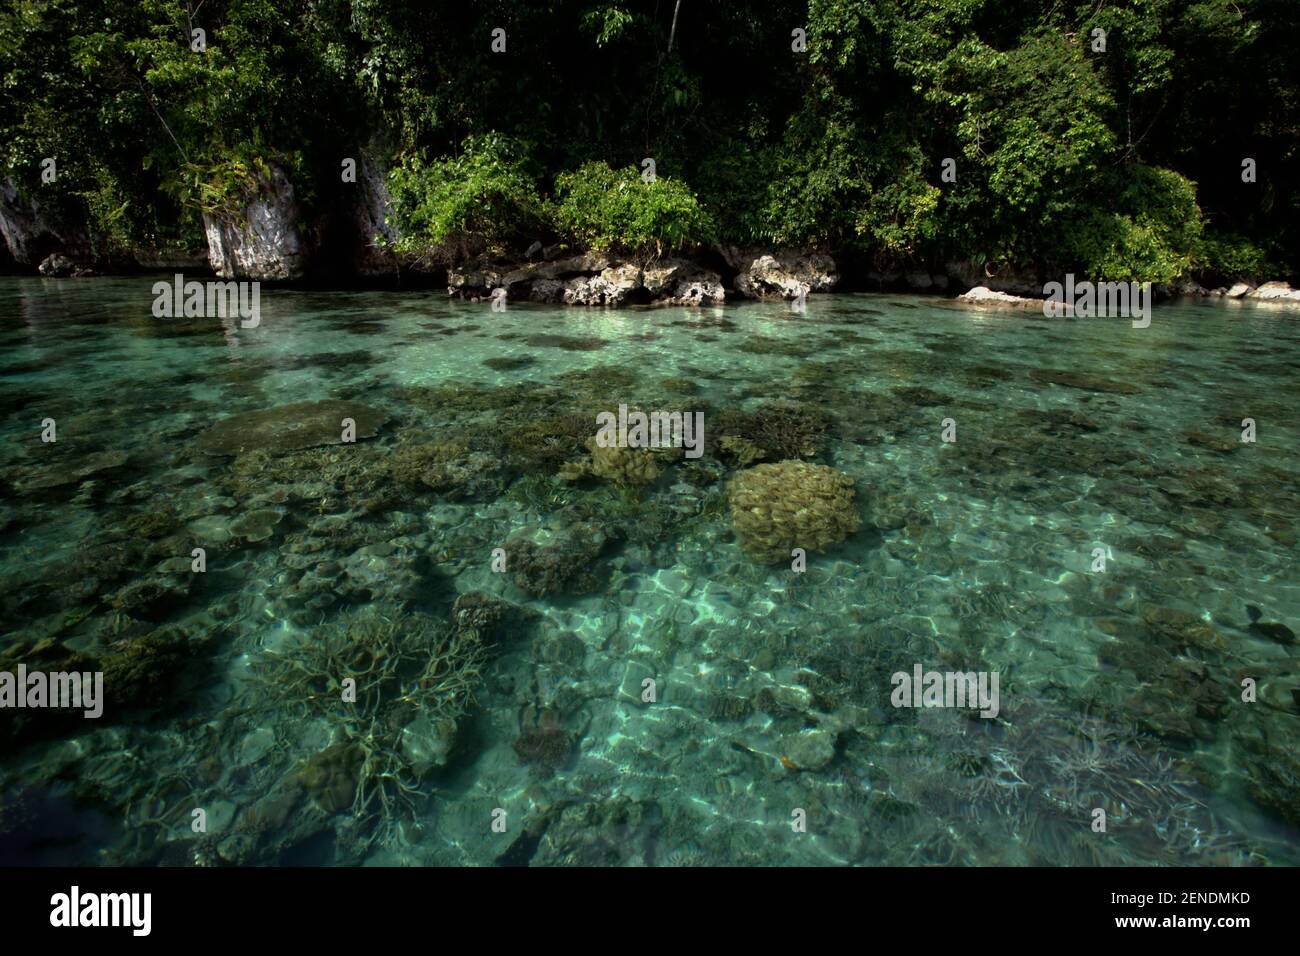 Coral reefs on the bed of coastal water close to a limestone hill called Watu Hupung in Central Maluku, Maluku province, Indonesia. Stock Photo